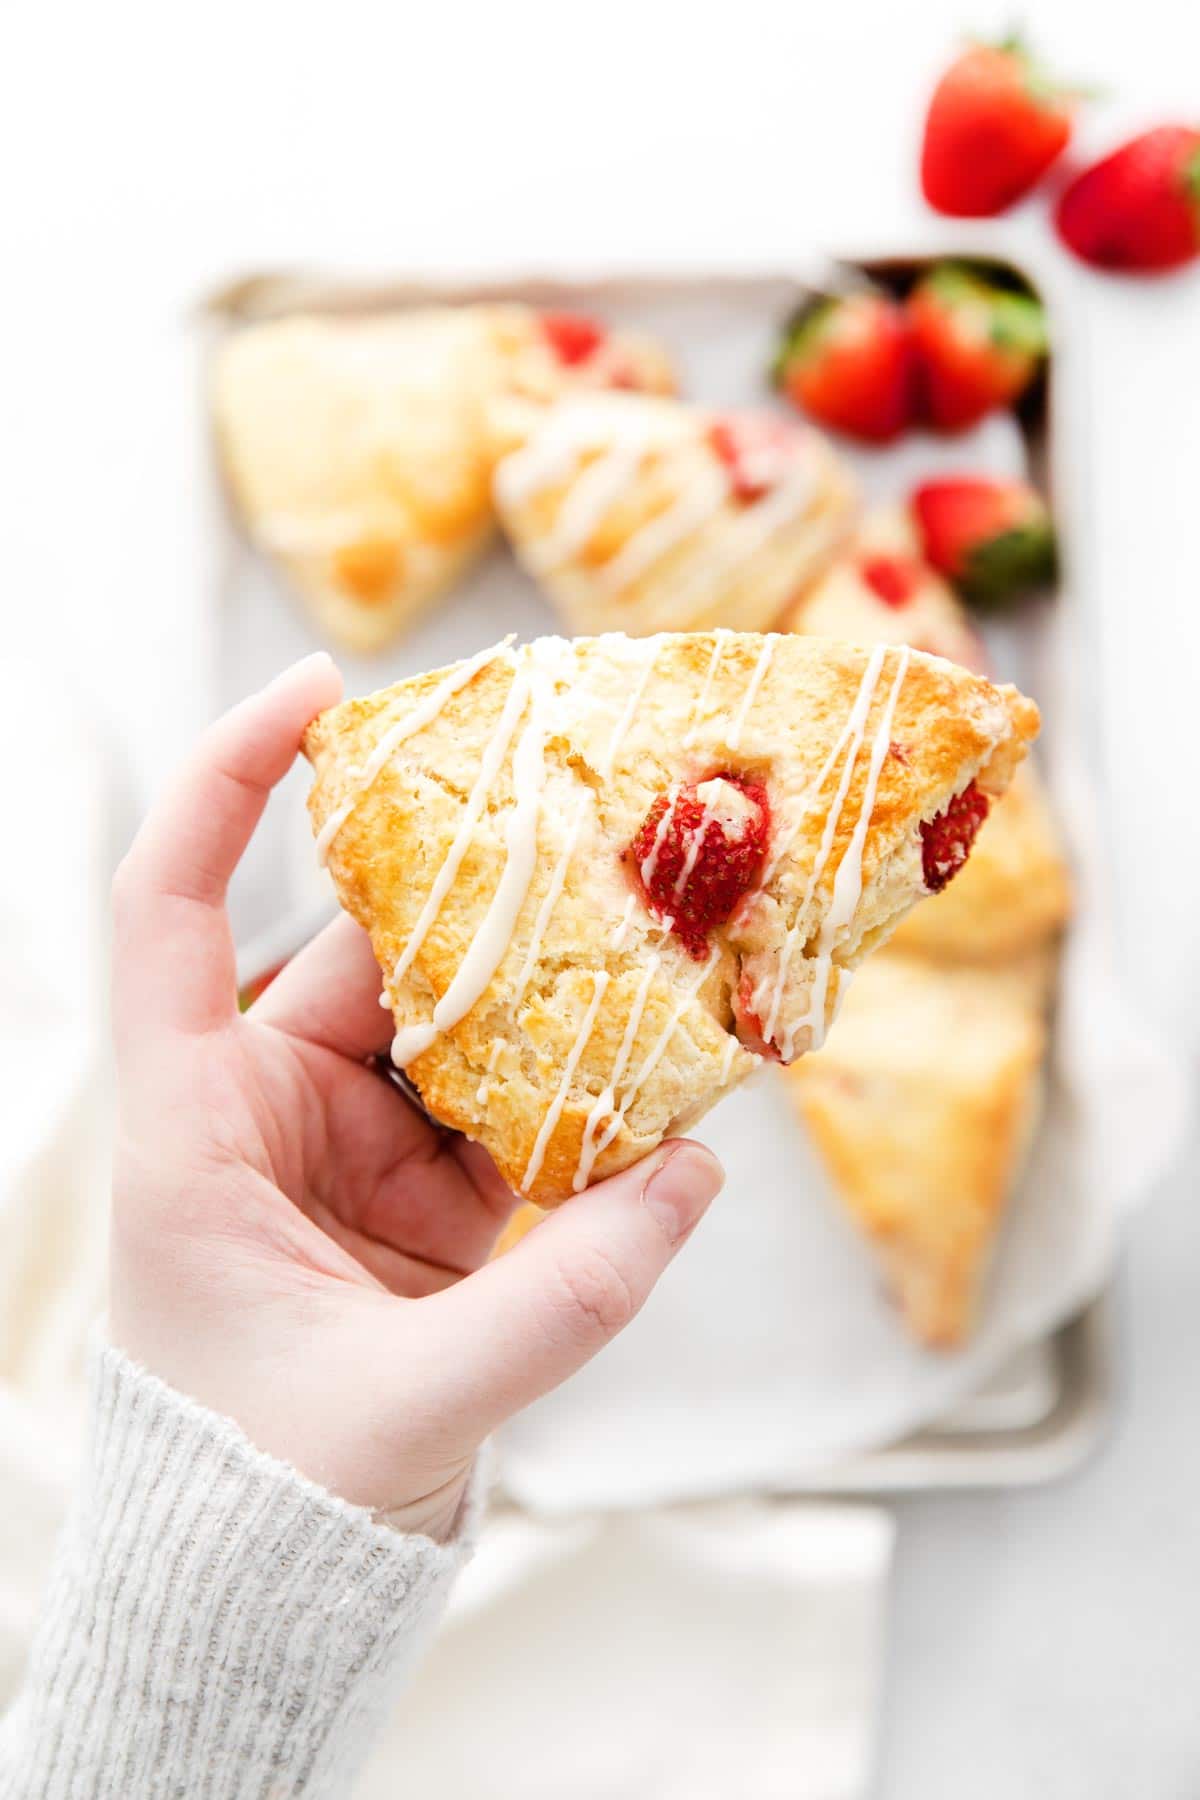 strawberry scone drizzled with vanilla frosting in someone's hand